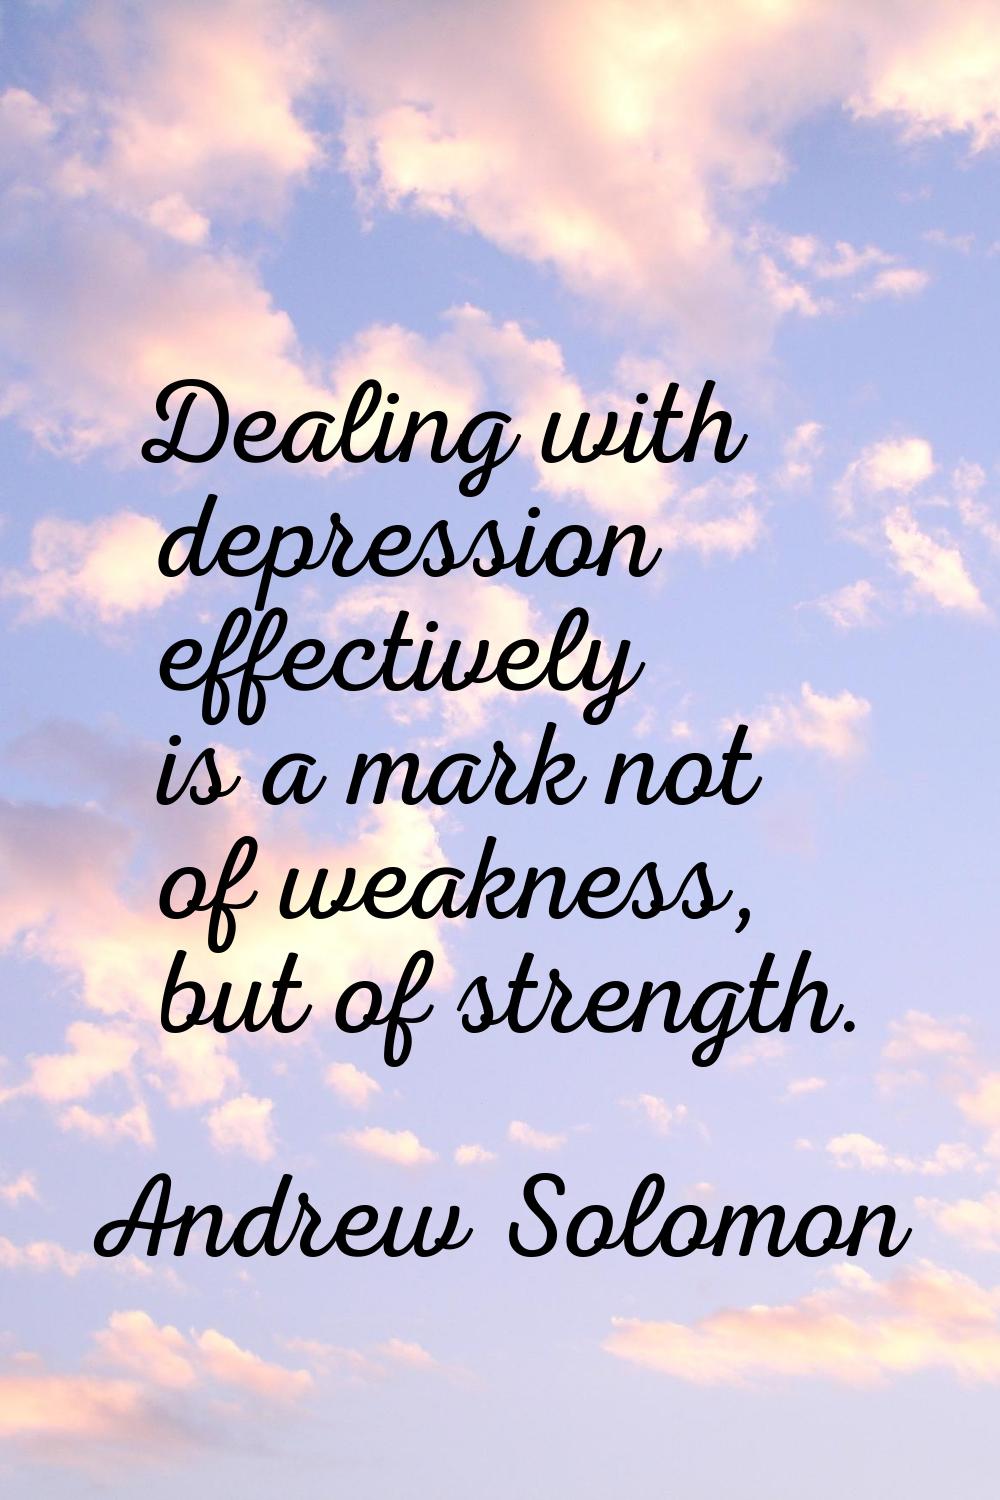 Dealing with depression effectively is a mark not of weakness, but of strength.